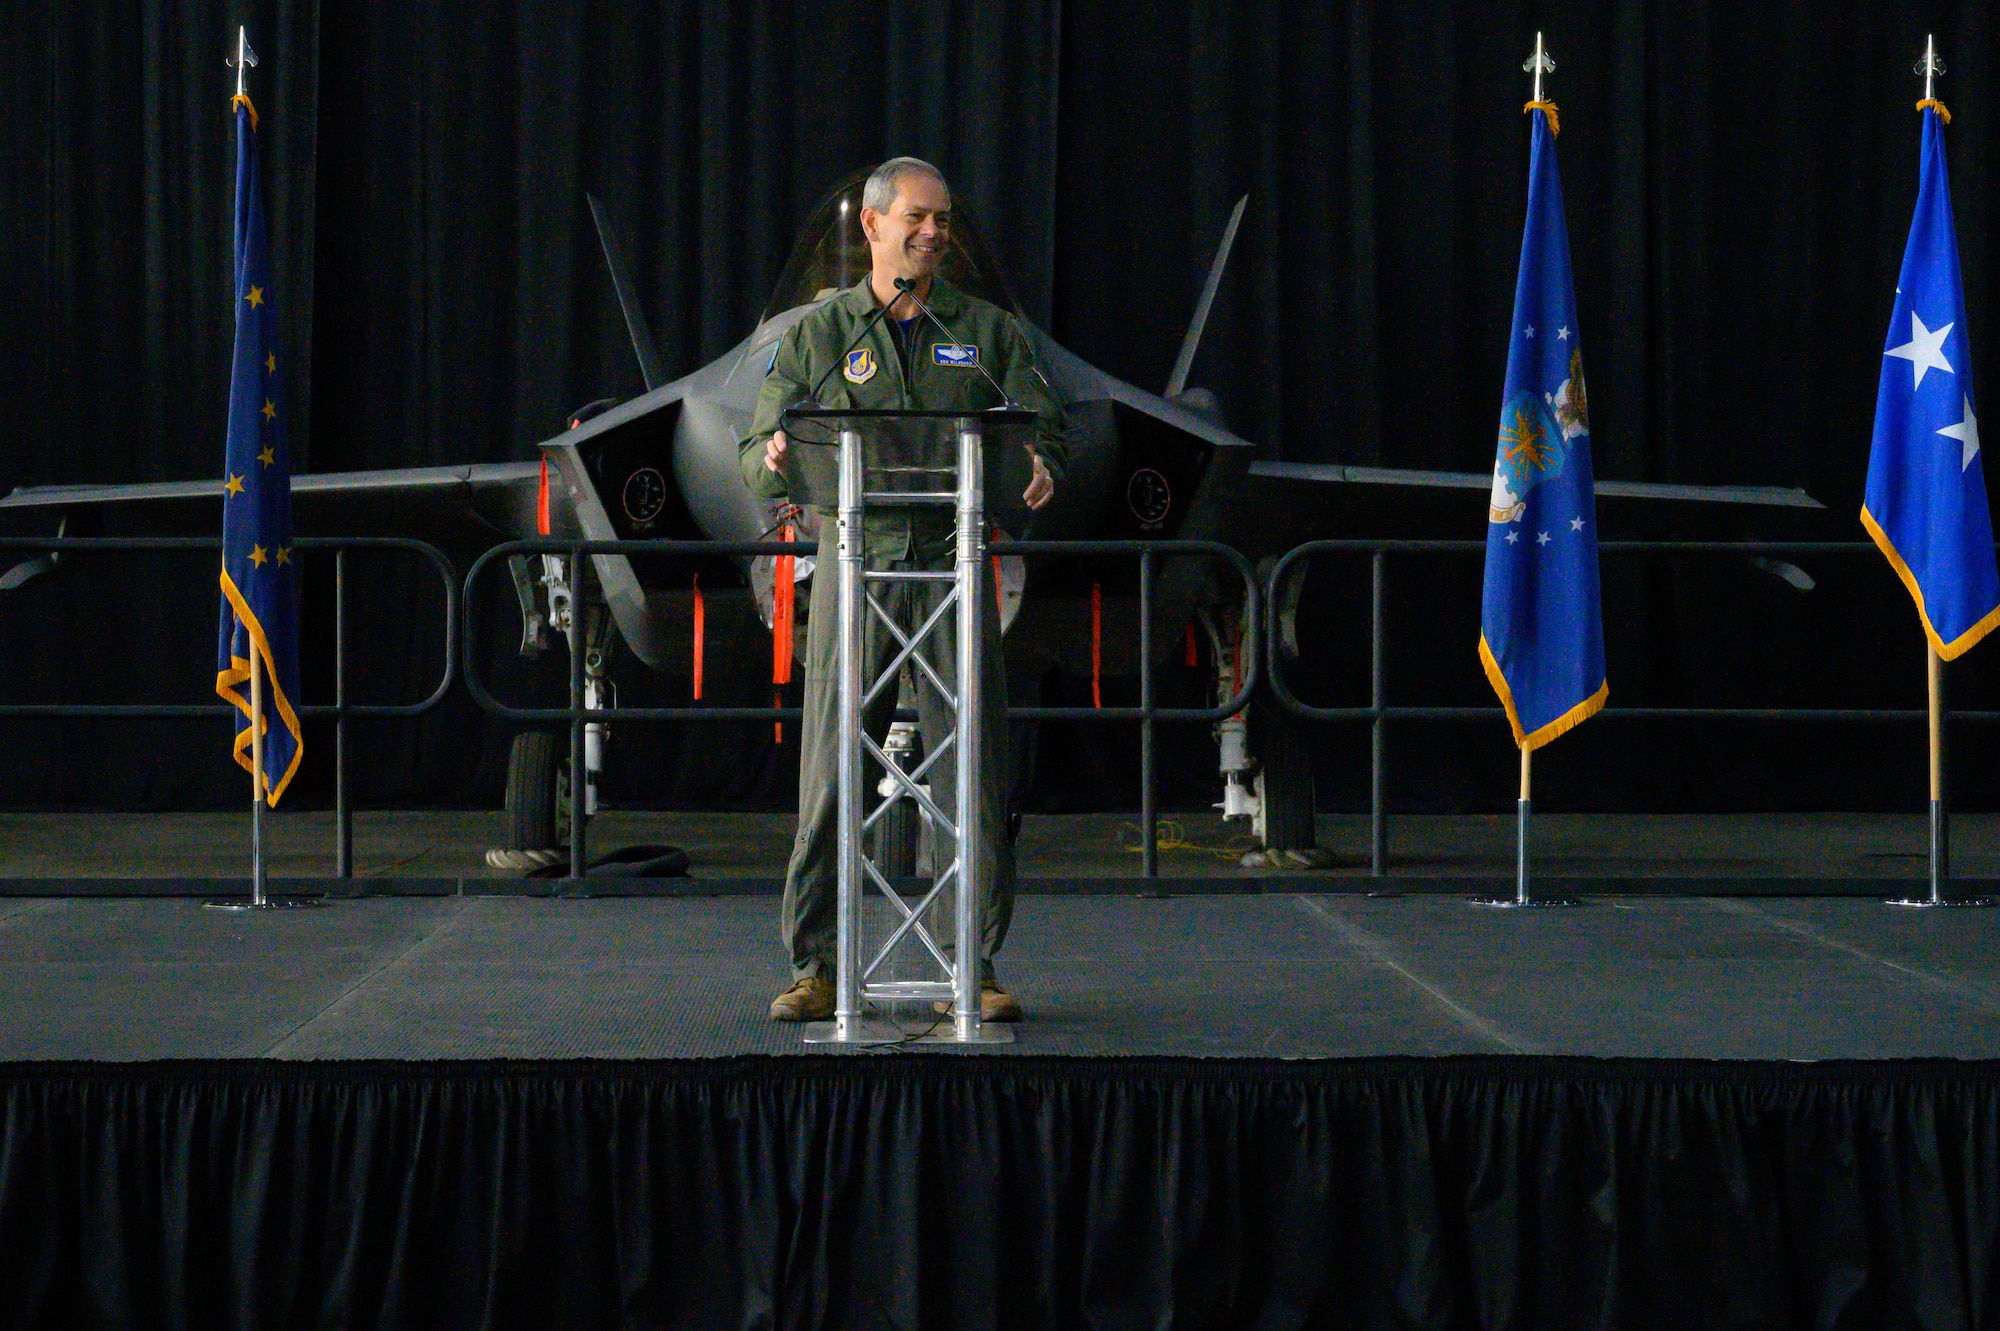 U.S. Air Force Gen. Kenneth S. Wilsbach, U.S. Pacific Air Forces commander, speaks at the 354th Fighter Wing’s Last Jet Arrival Party May 13, 2022, on Eielson Air Force Base, Alaska.